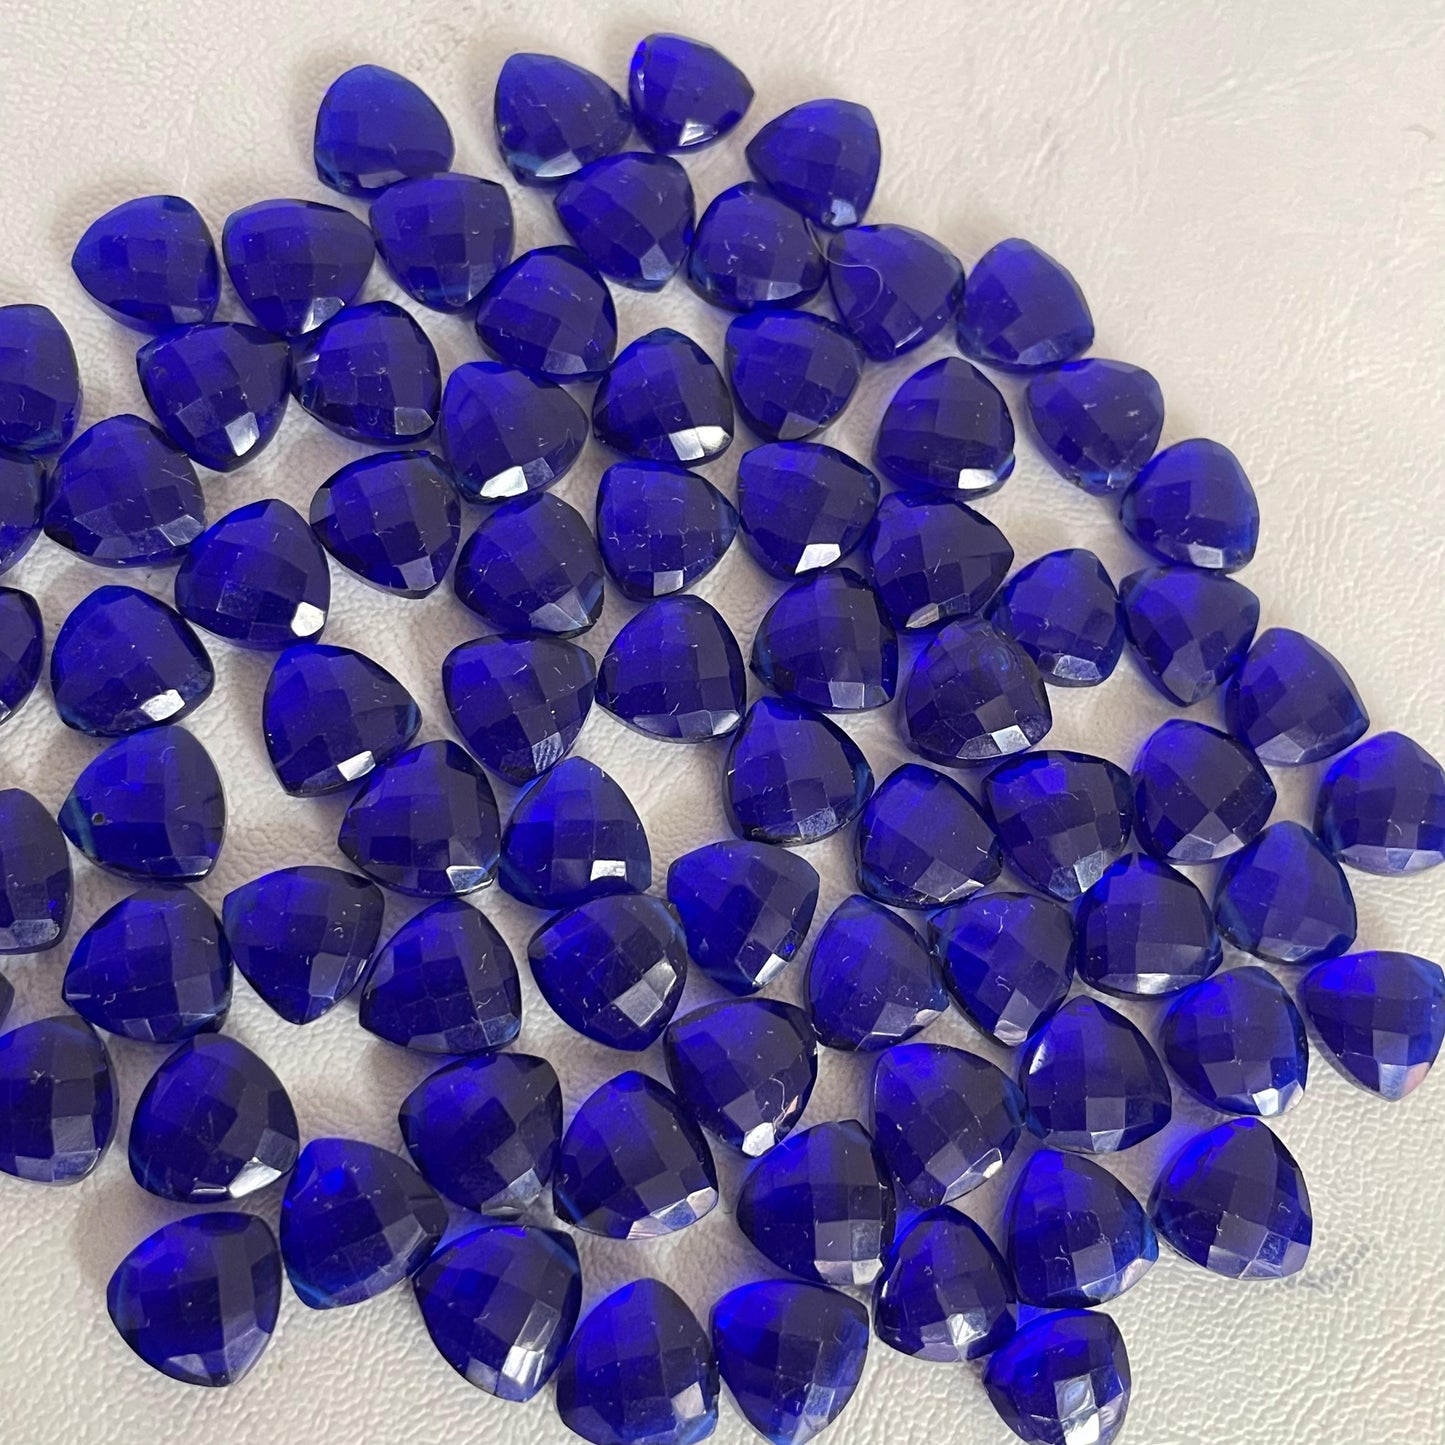 Tanzanite Faceted Nice Quality (11 mm) Briolette